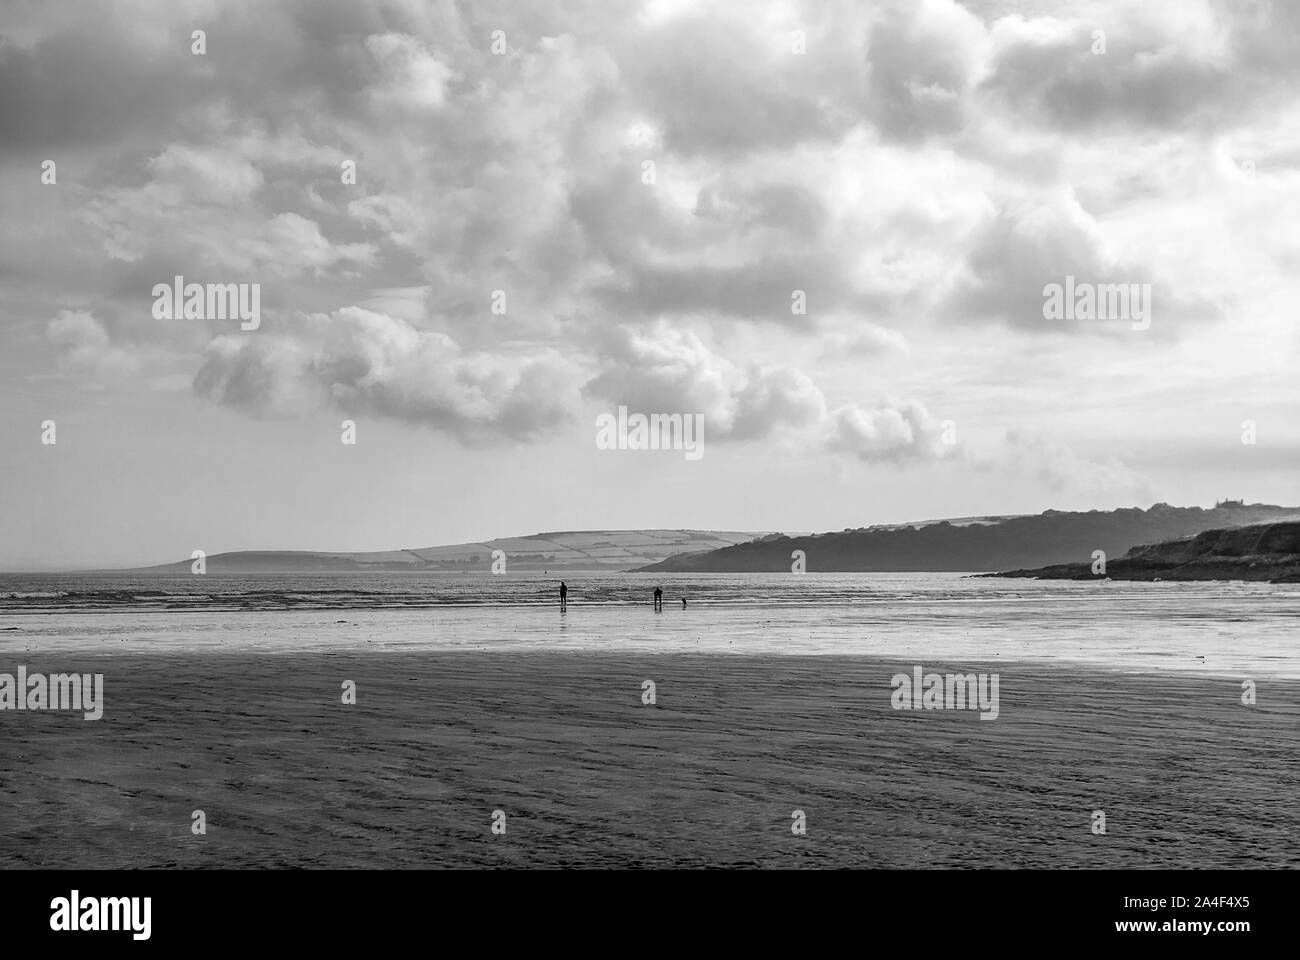 Couple walking on sandy beach leaving footprints in the sand. One father and his daughter enjoying the day. Cloudy day. Stock Photo